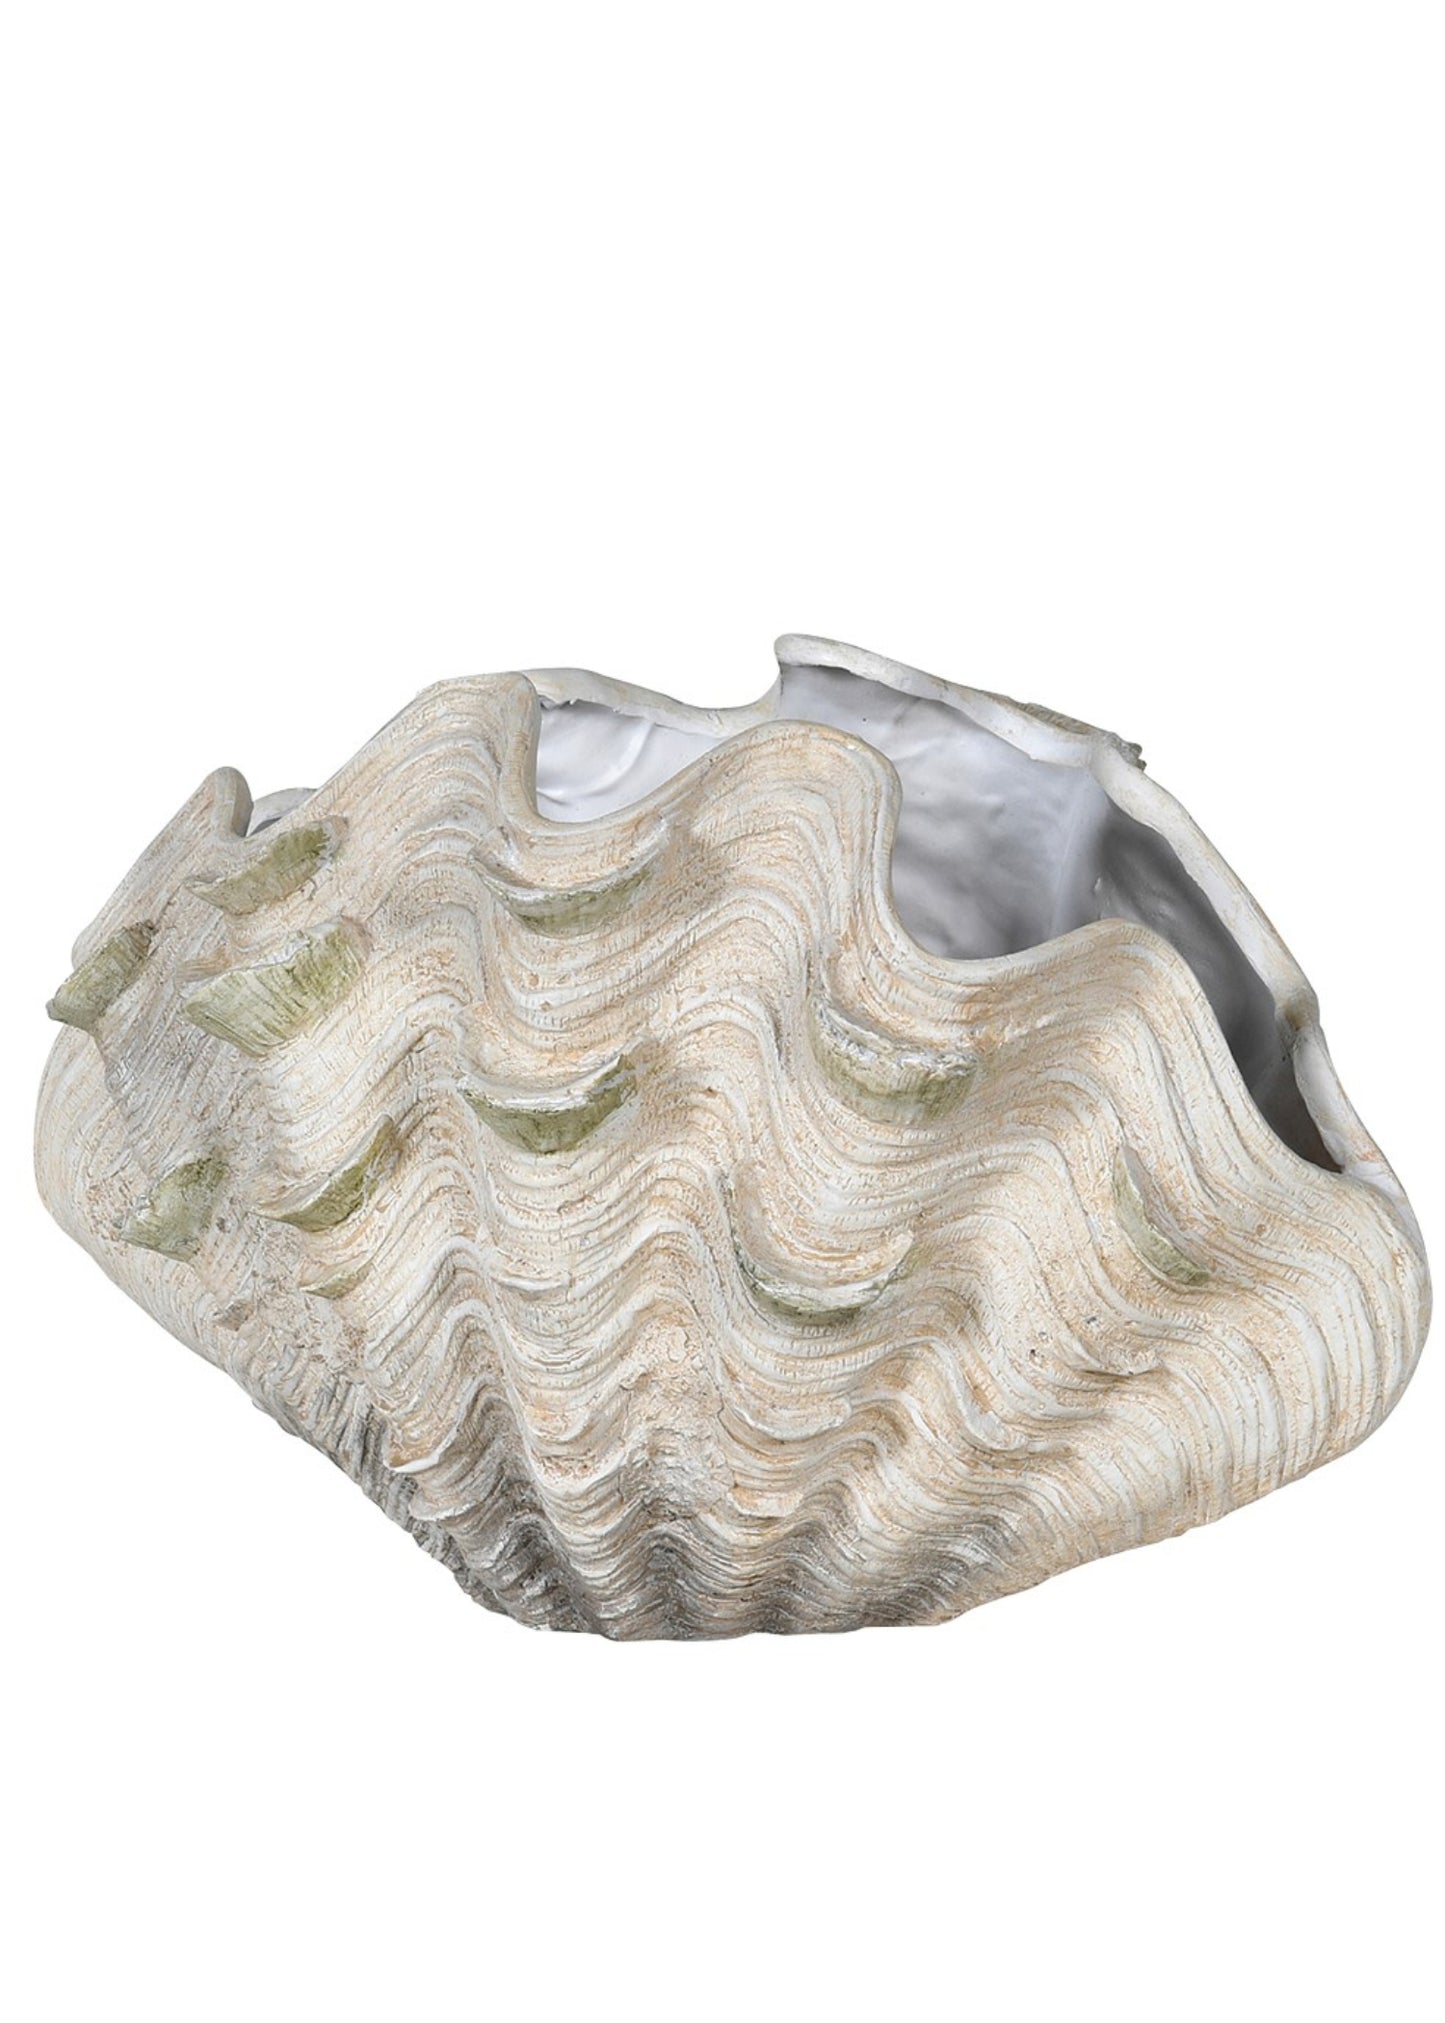 Decorative Resin Clam Shell